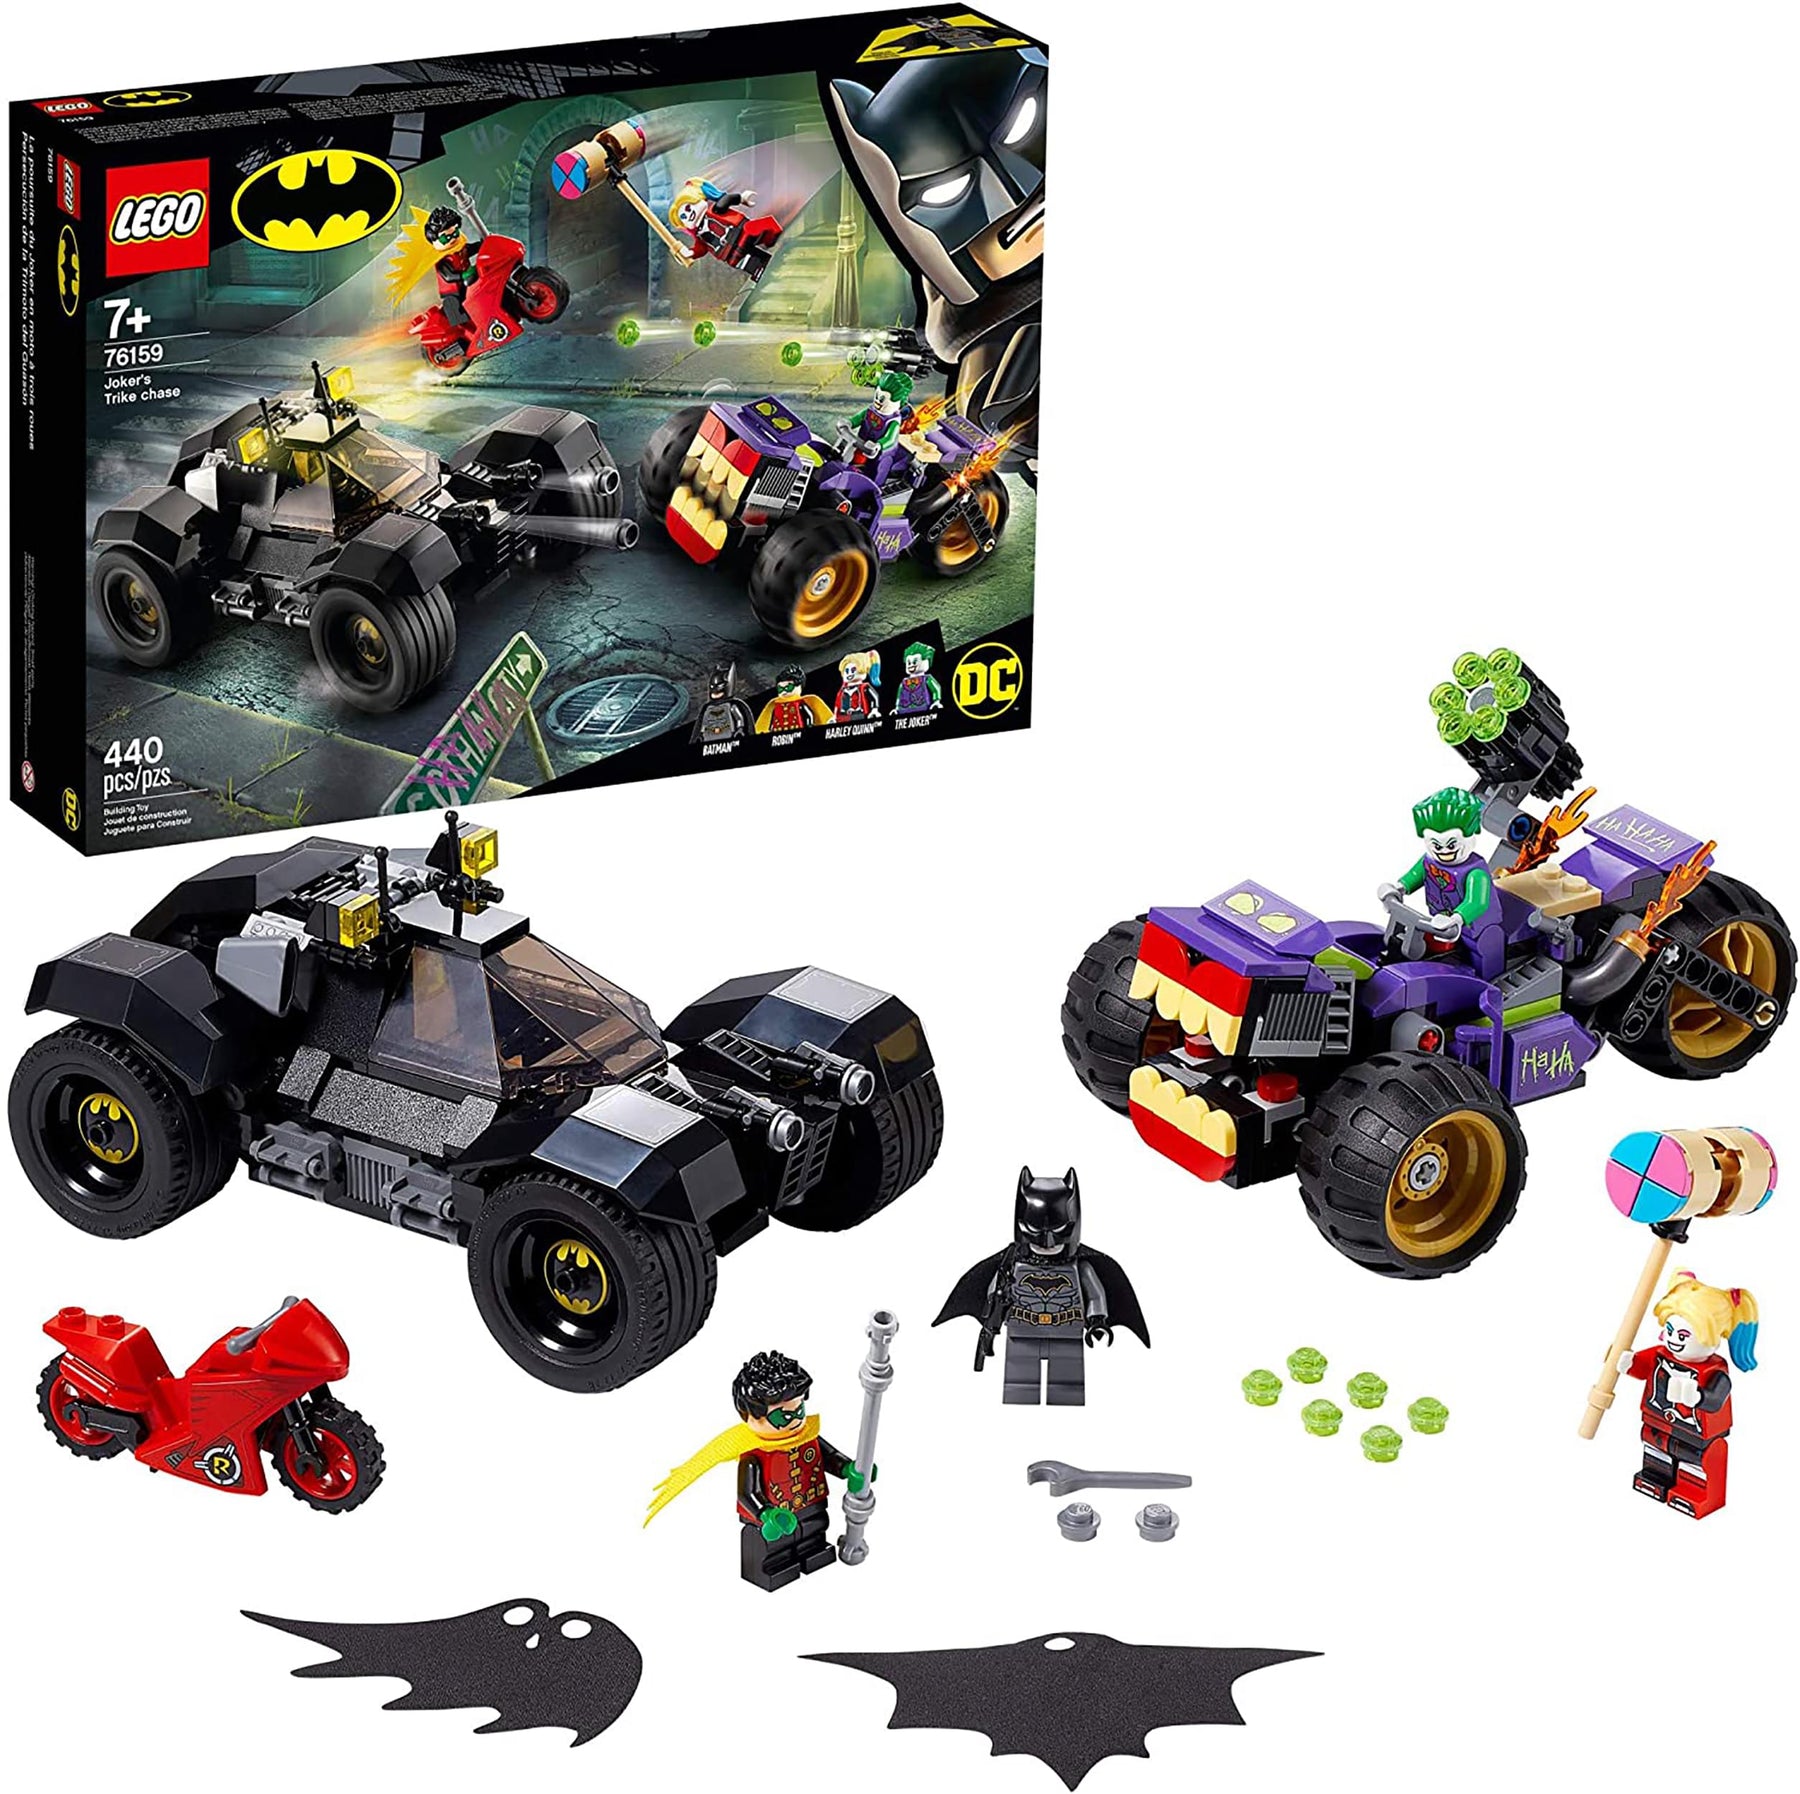 LEGO DC Super Heroes 76159 Jokers Trike Chase 440 Piece Building Kit